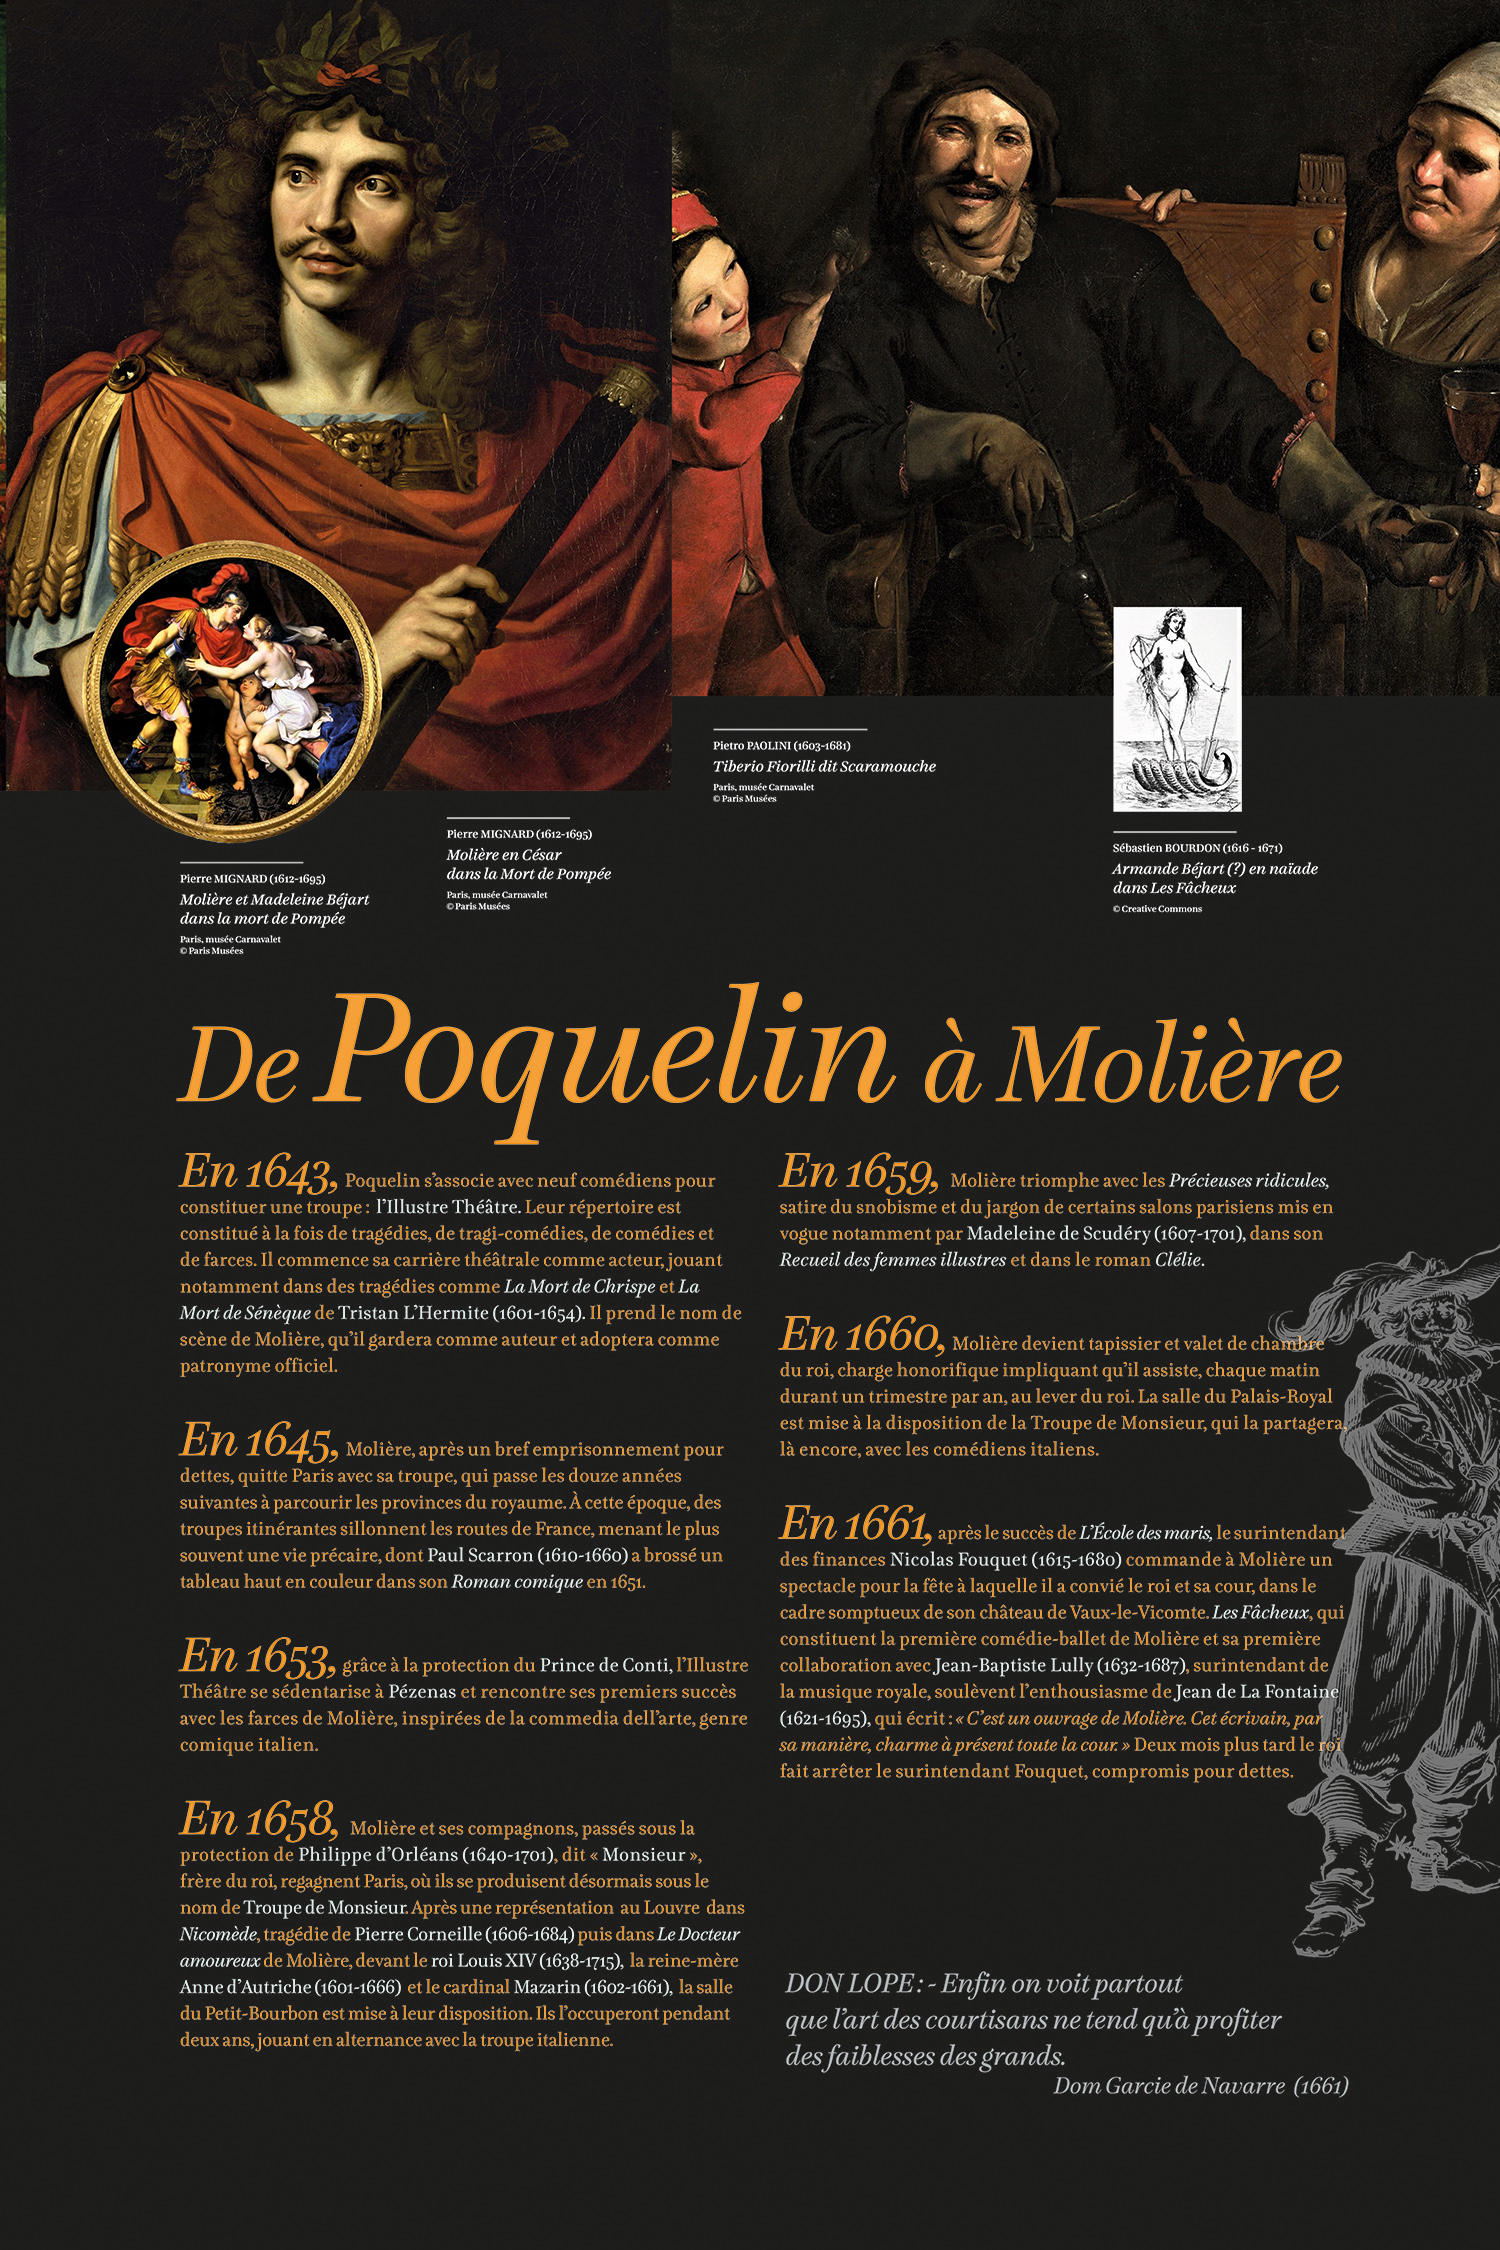 Moliere-(1000x1500mm)-Page à Page7